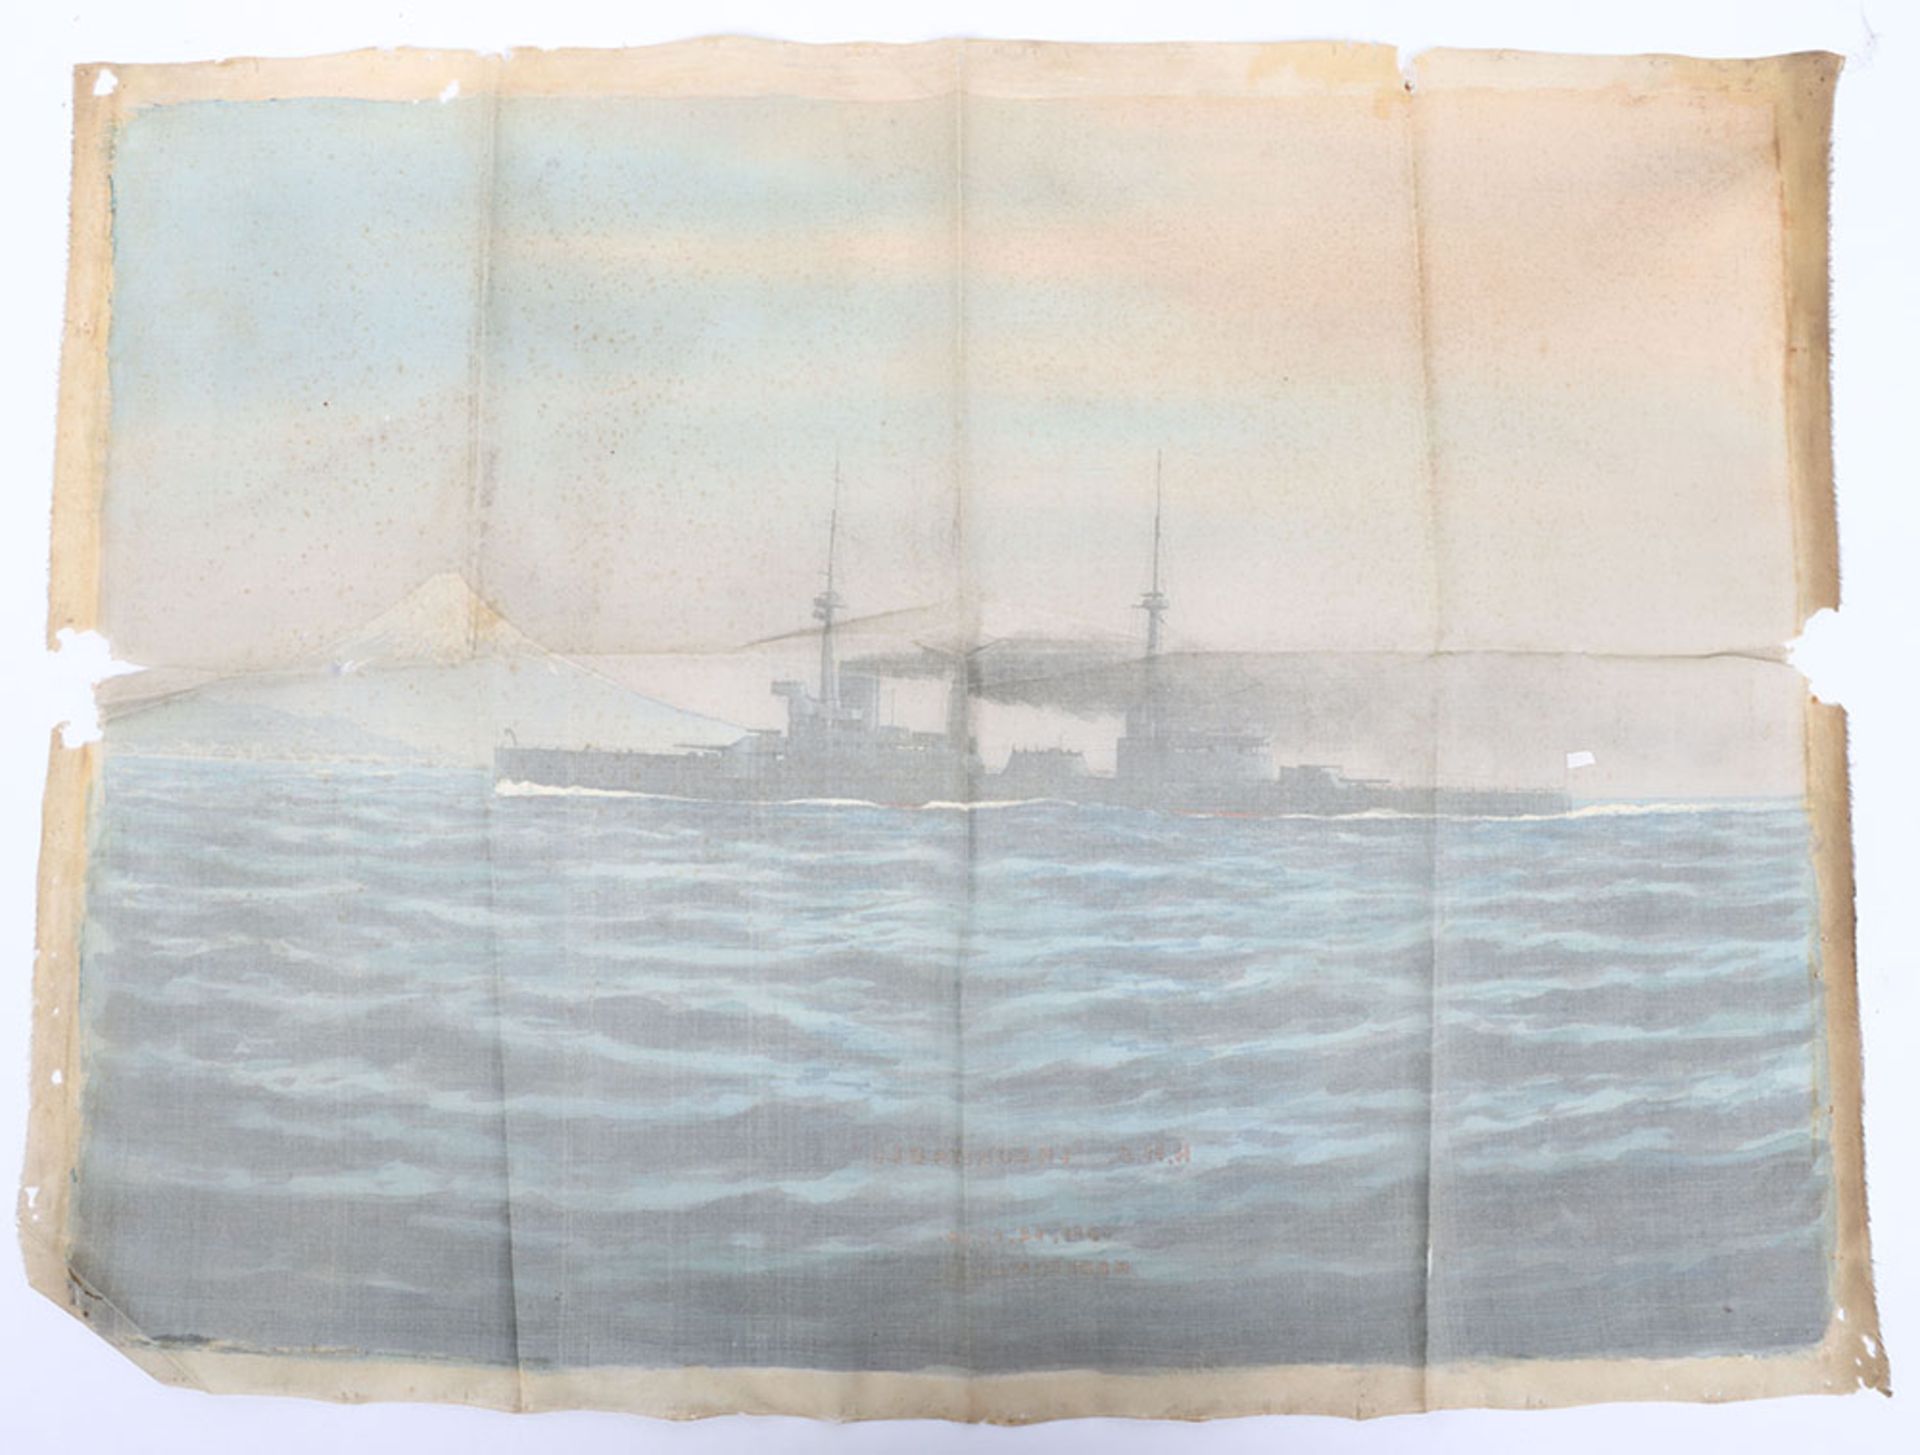 Painting of H.M.S. Indomitable - Image 5 of 5